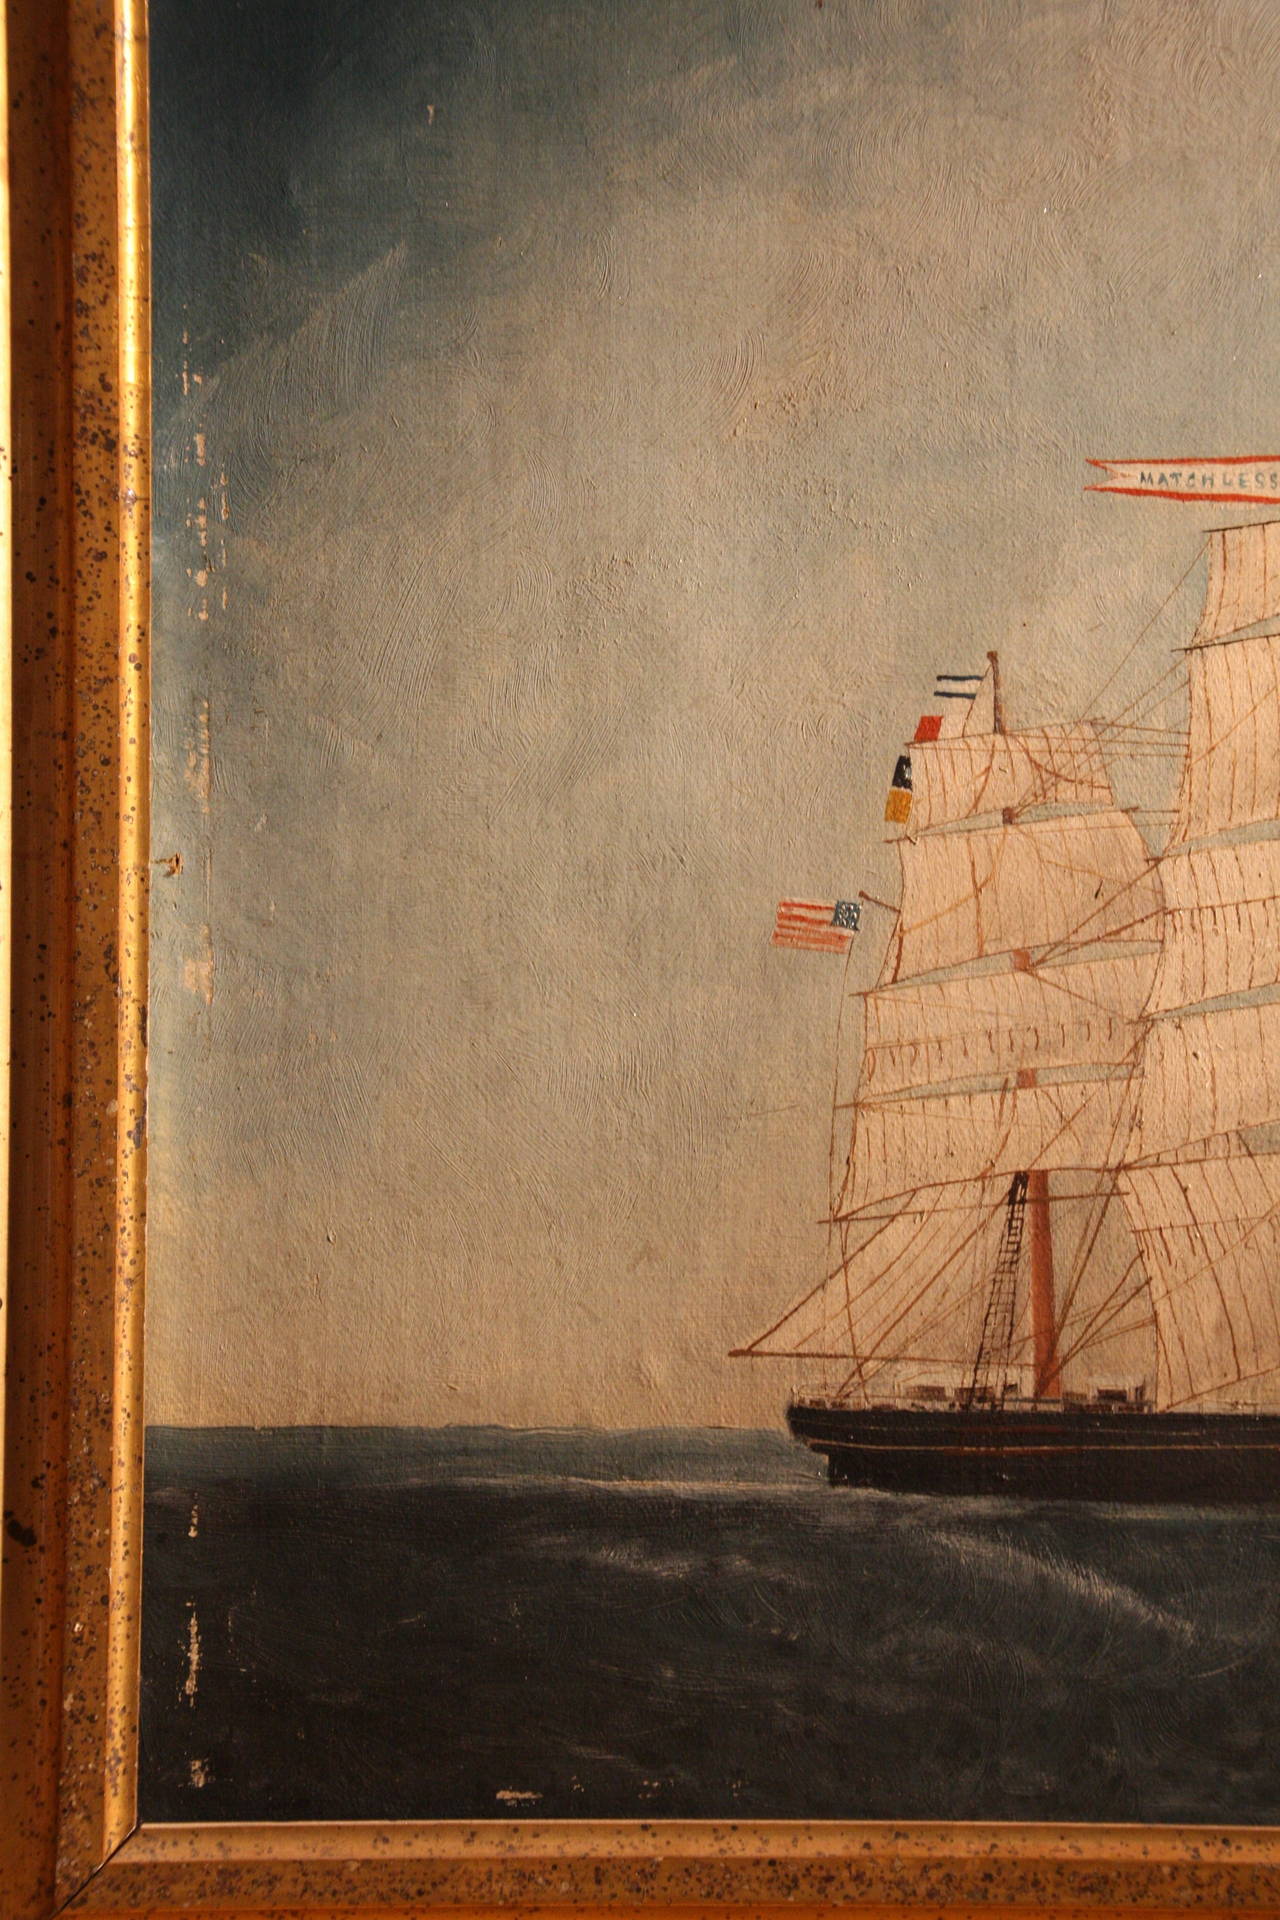 19th Century Seascape of the American Ship Matchless 6